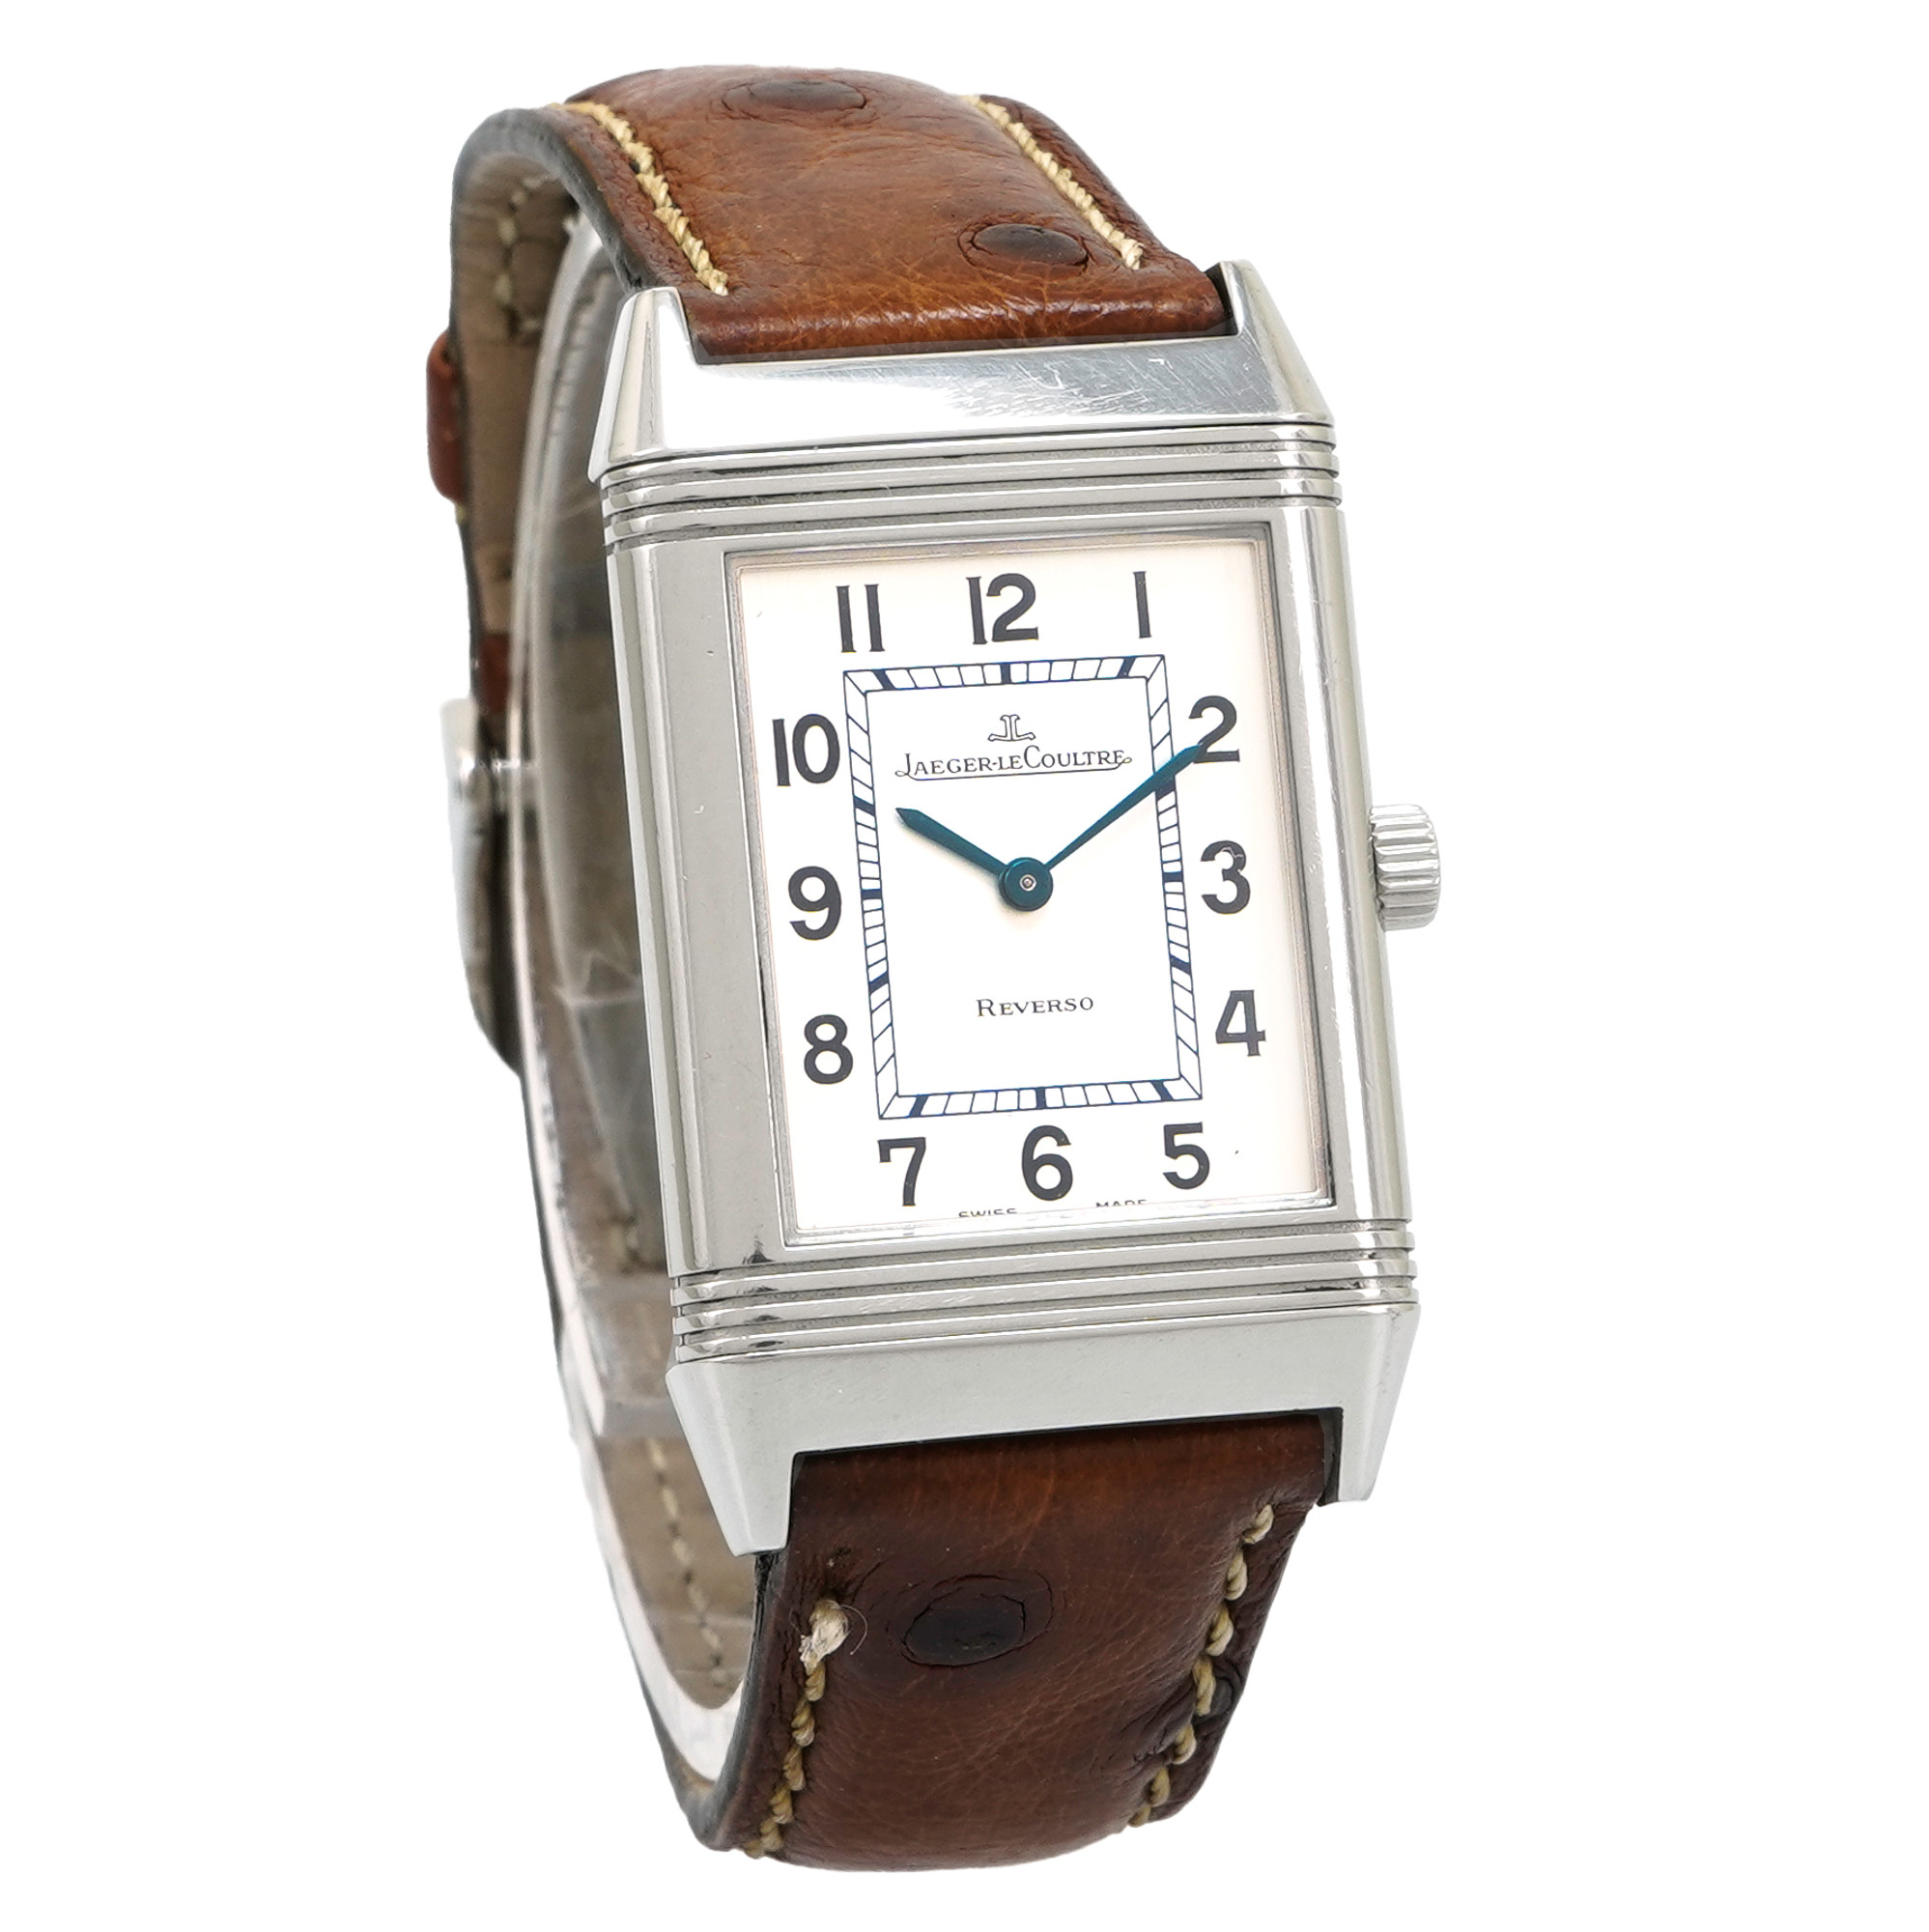 Jaeger LeCoultre Reverso Classic - Inventory 4067